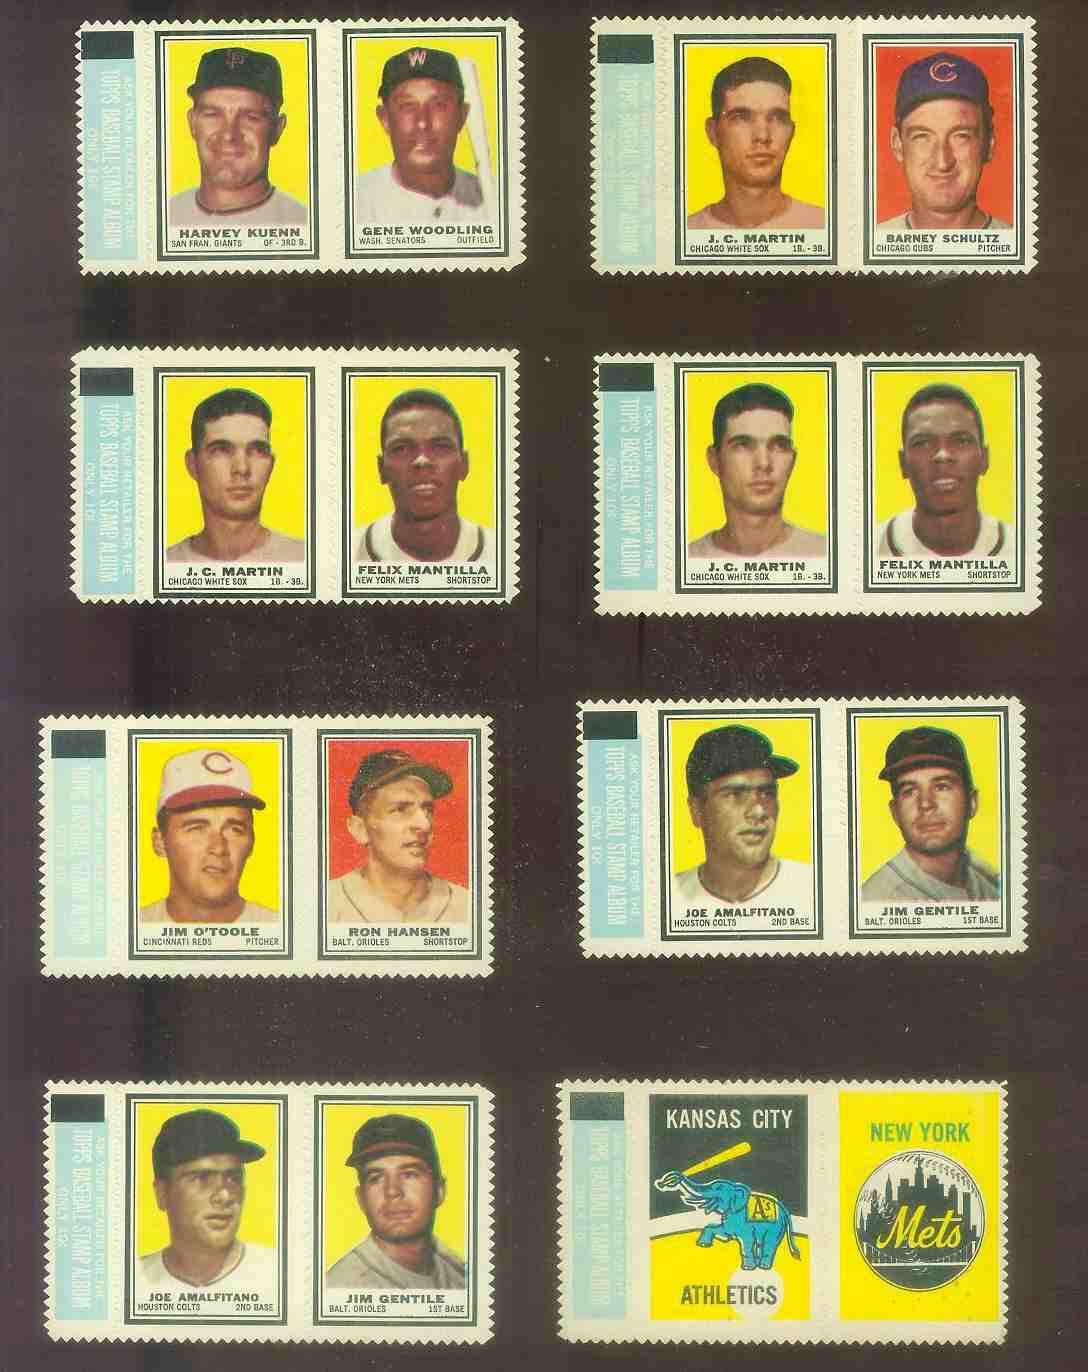   Harvey Kueen/Gene Woodling - 1962 Topps STAMP PANEL with TAB !!! Baseball cards value